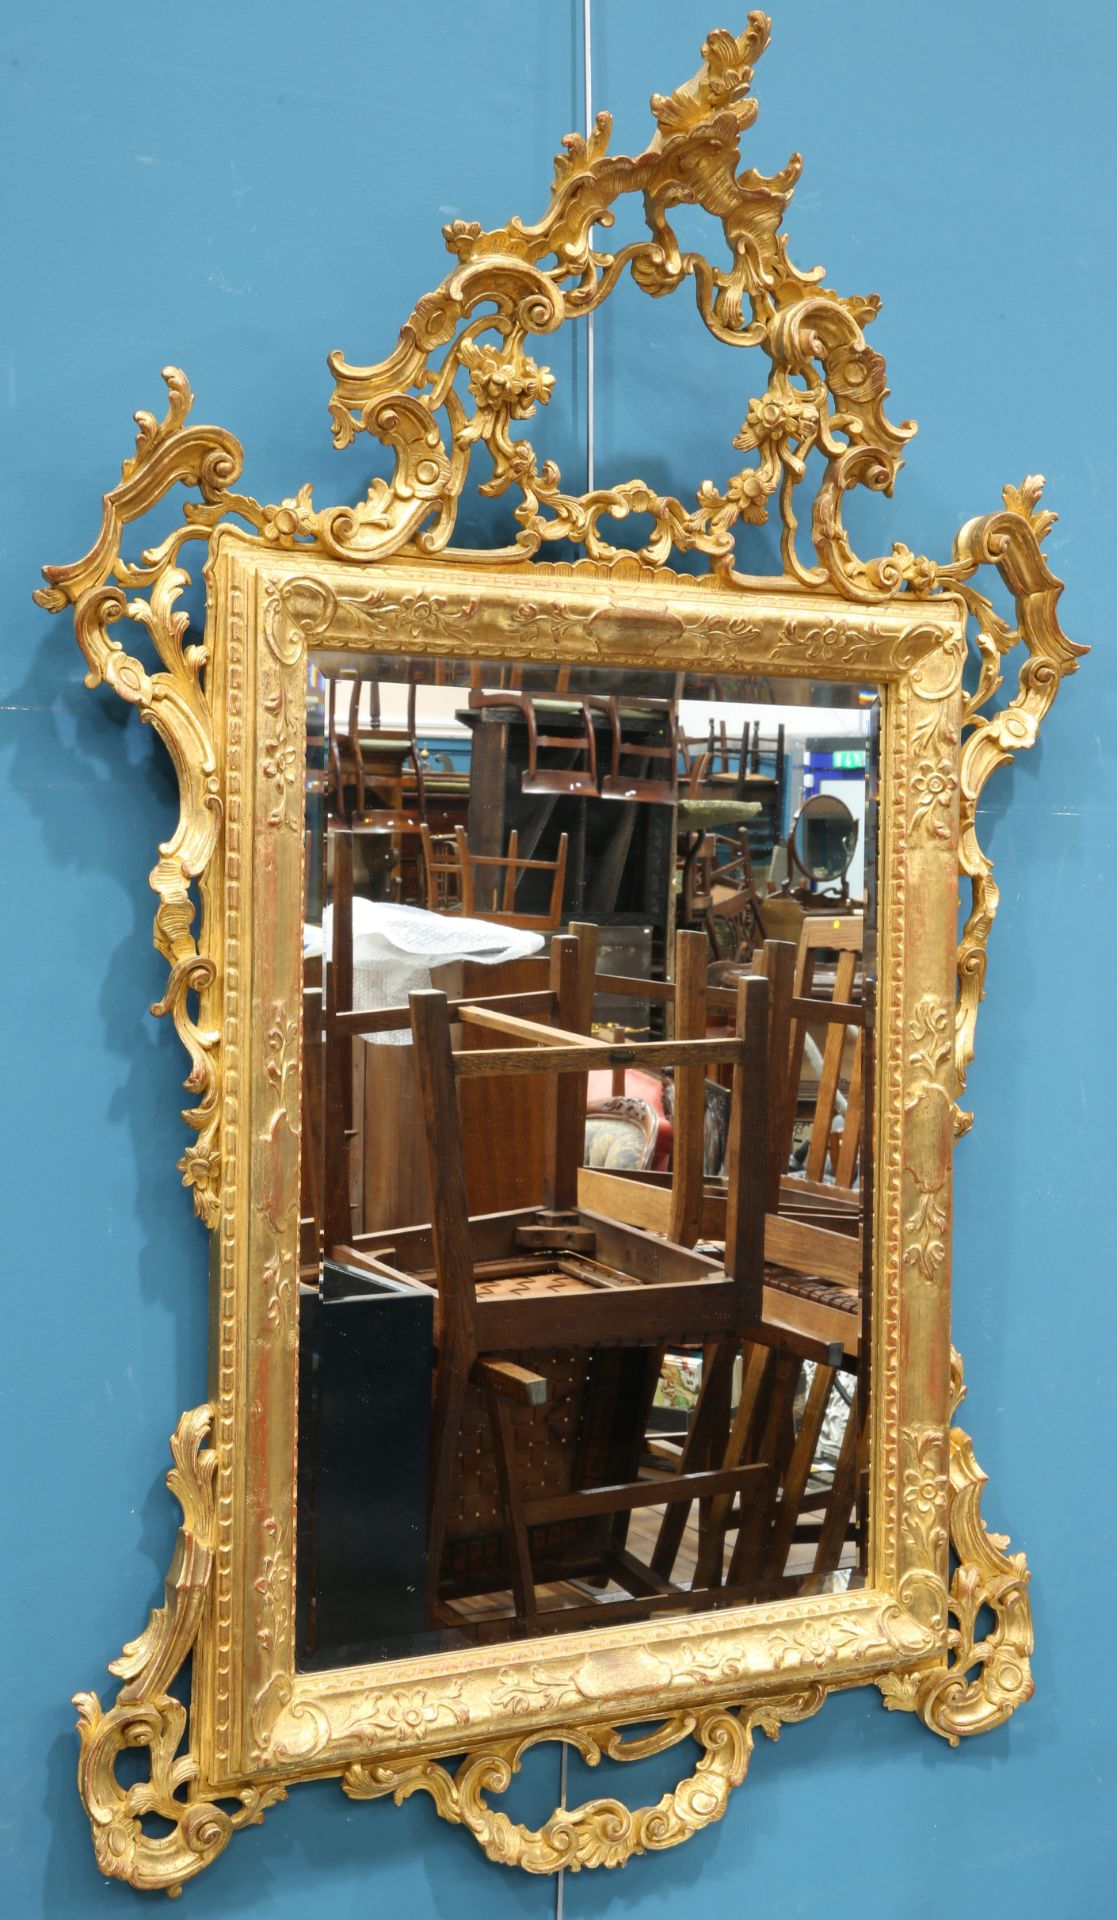 A ROCOCO STYLE GILT-COMPOSITION MIRROR, rectangular, the pierced crest moulded with C-scrolls and